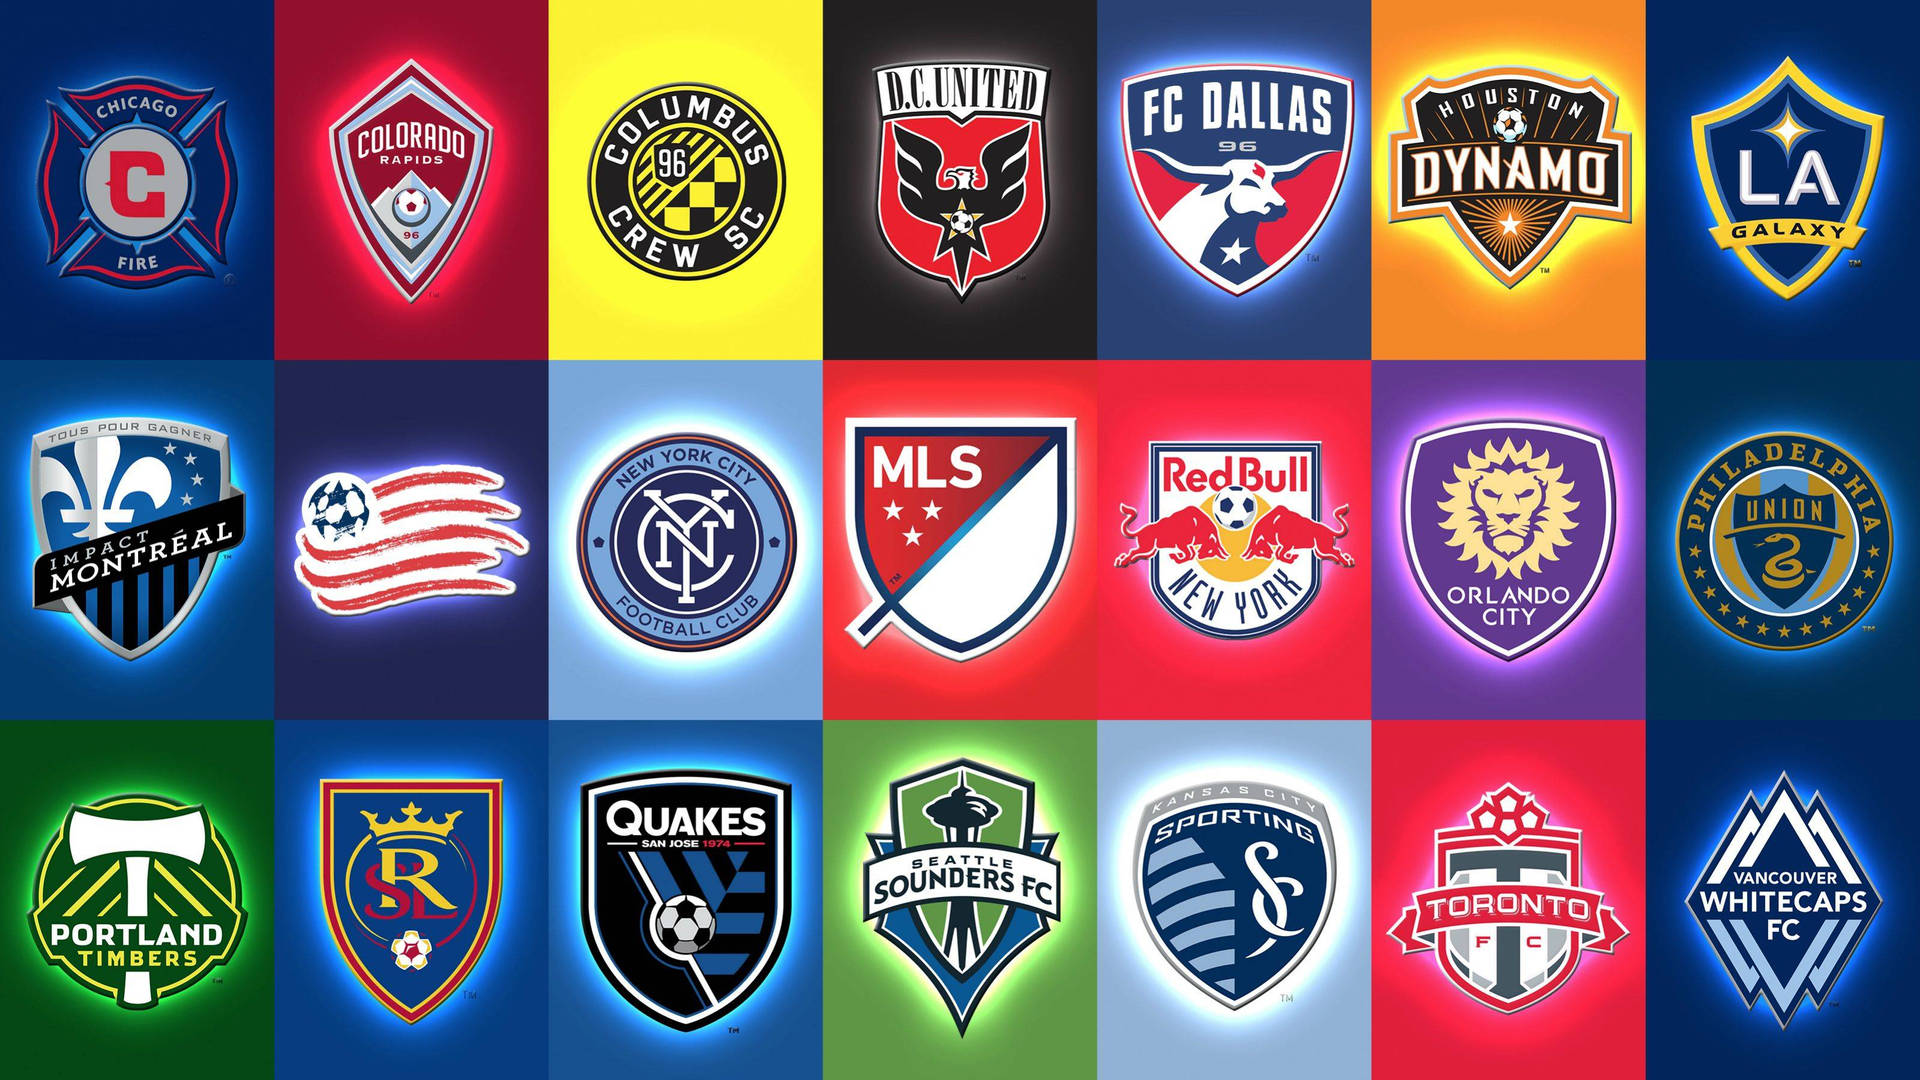 Colorado Rapids And Other Soccer Teams Wallpaper